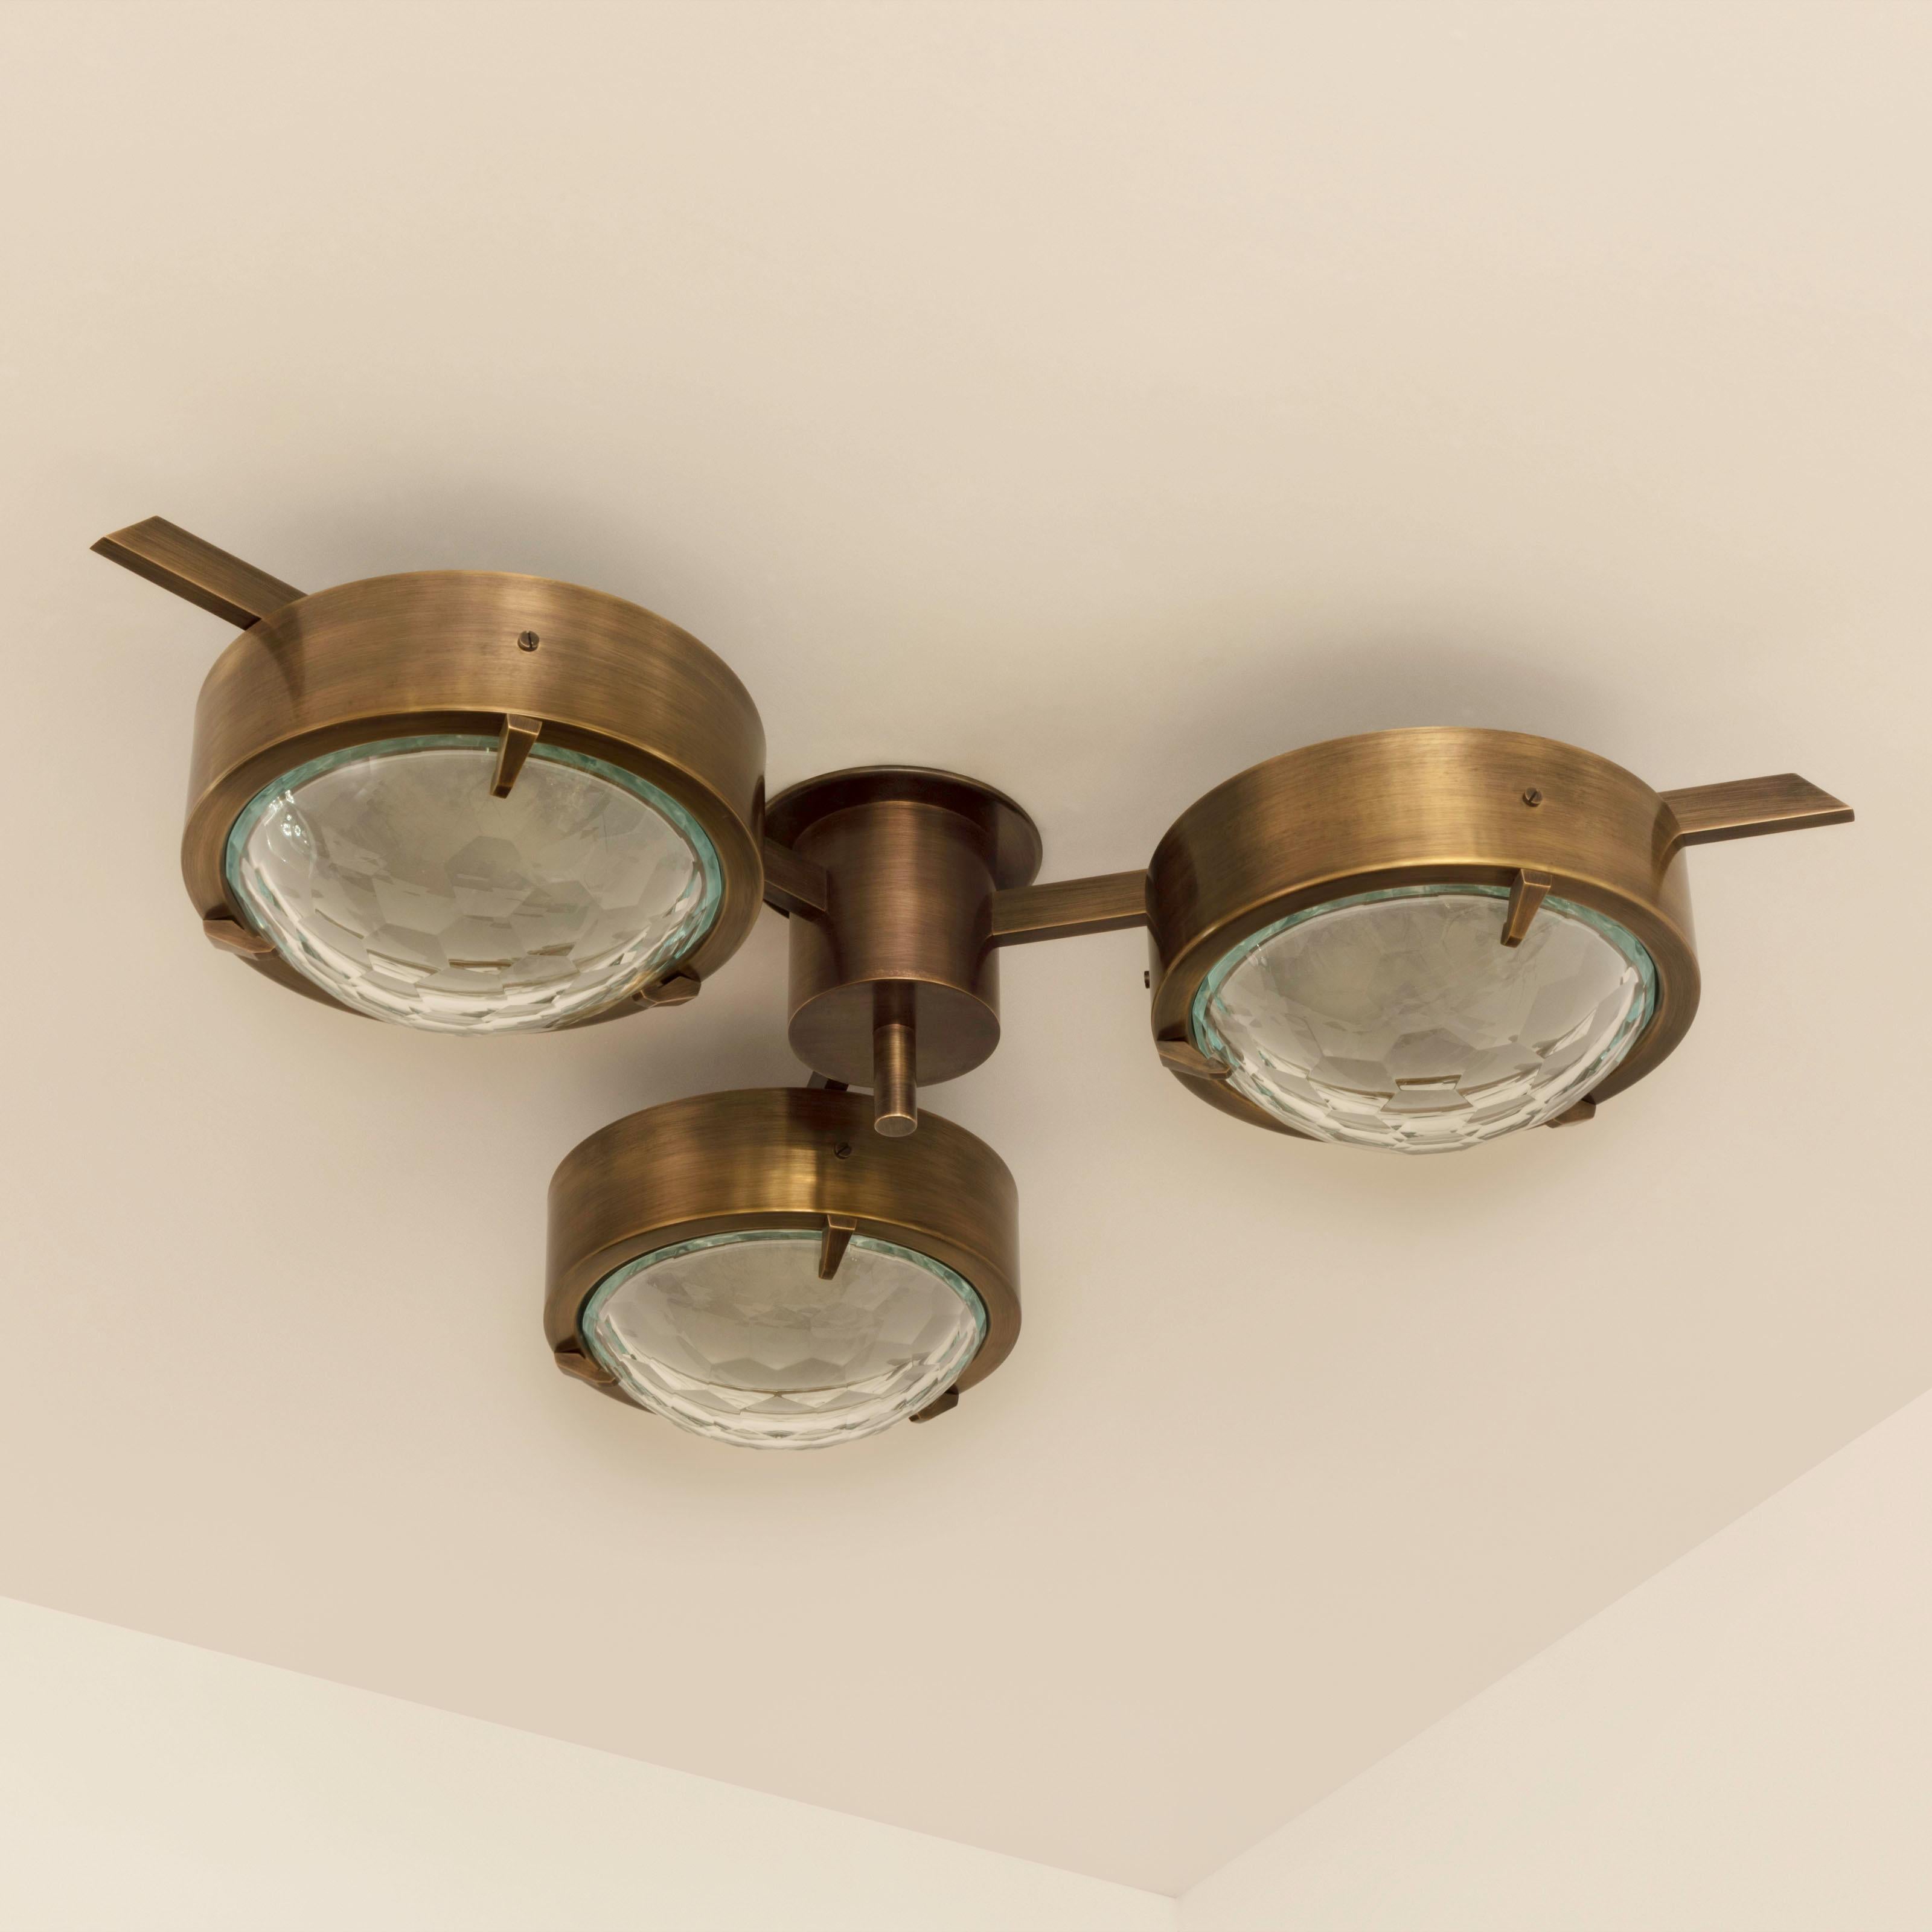 The Smeraldo ceiling light by form A features three shades hand faceted from thick starphire glass, balanced on a brass machined frame. Shown as a flush mount in our bronzo ottone finish.

Customization Options: 

Each fixture is handcrafted in